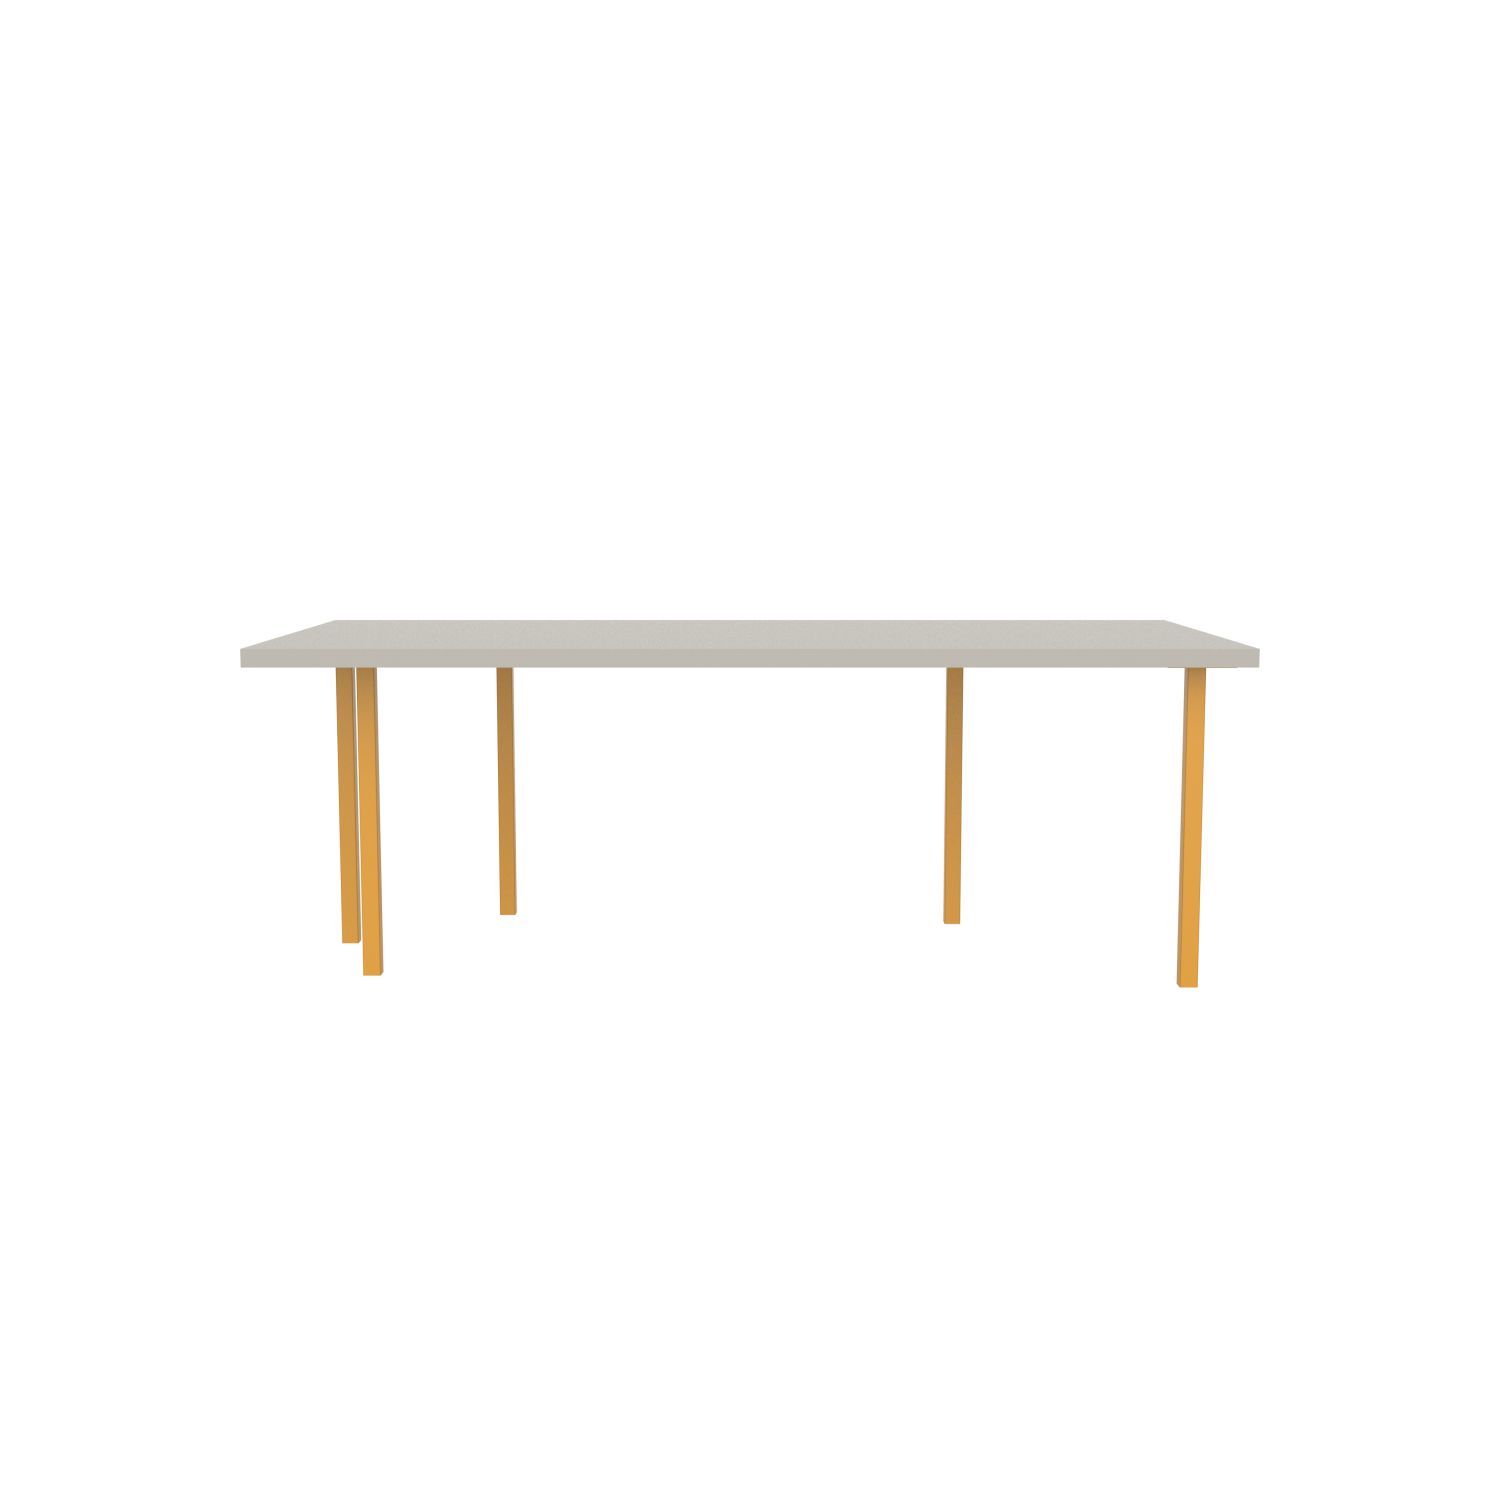 lensvelt bbrand table five fixed heigt 103x218 hpl white 50 mm price level 1 yellow ral1004